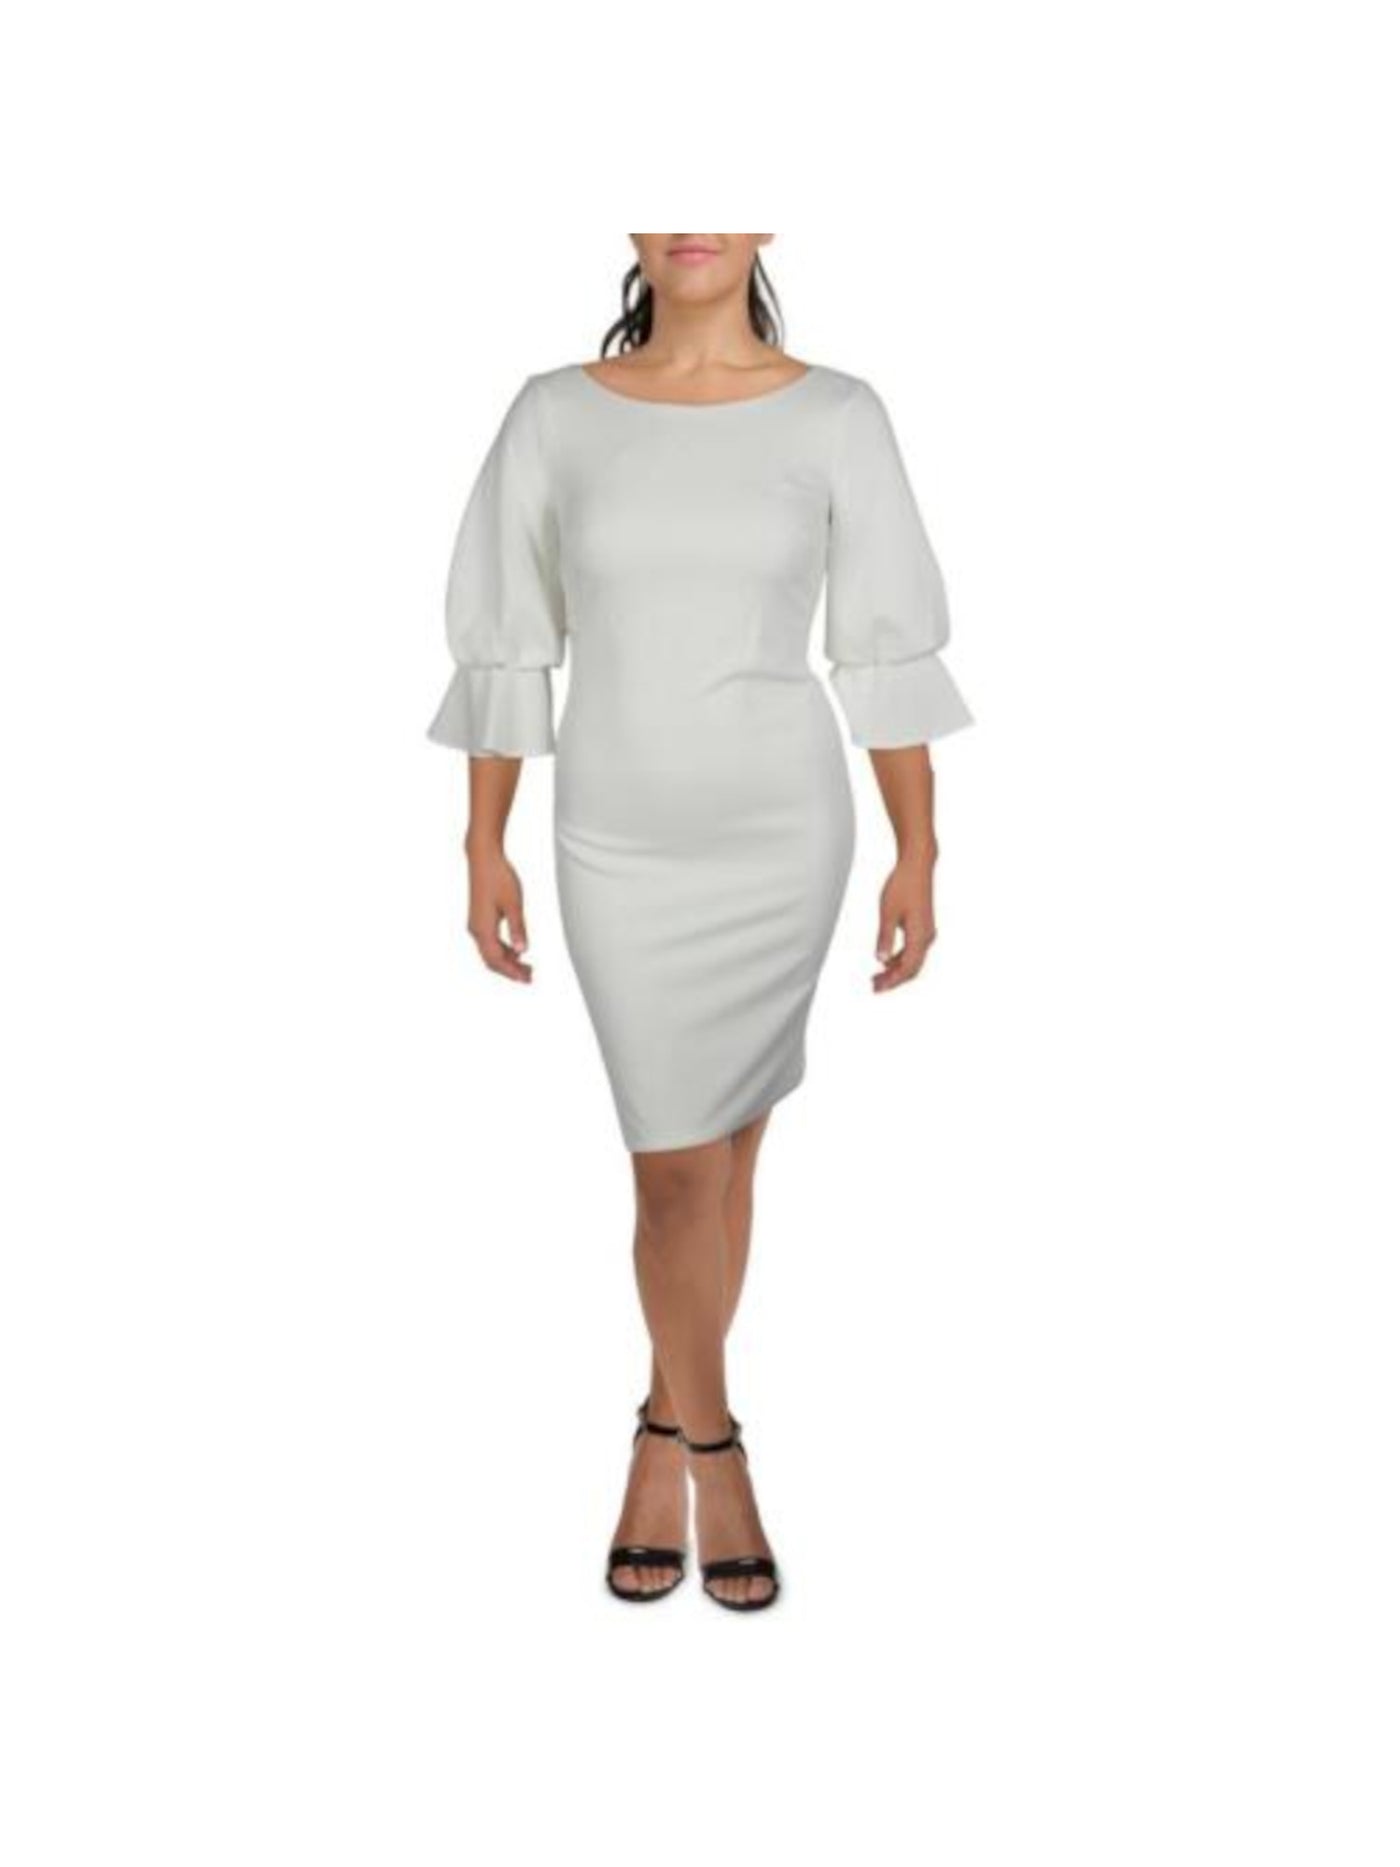 CALVIN KLEIN Womens White Zippered Lined V-back Bell Sleeve Round Neck Above The Knee Cocktail Sheath Dress 6